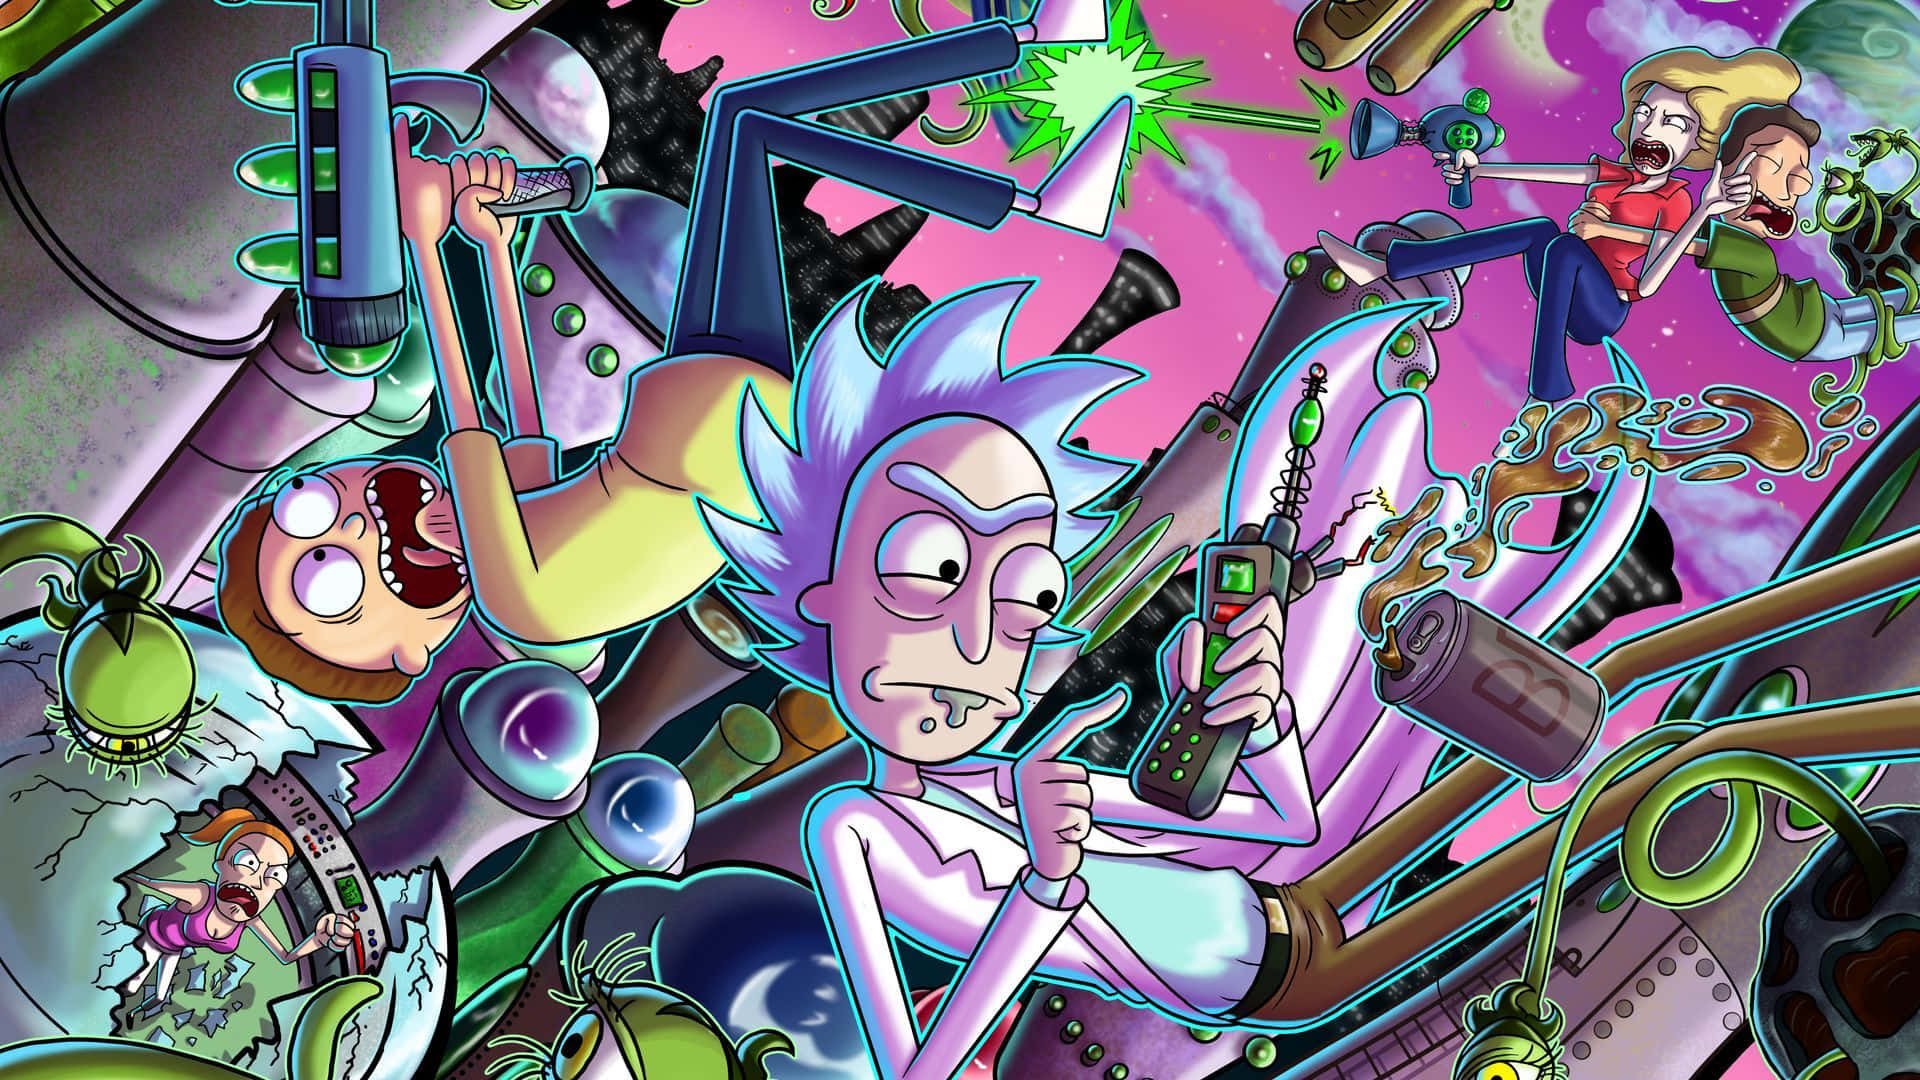 Two Science Buddies, Rick and Morty, Explore their World Wallpaper